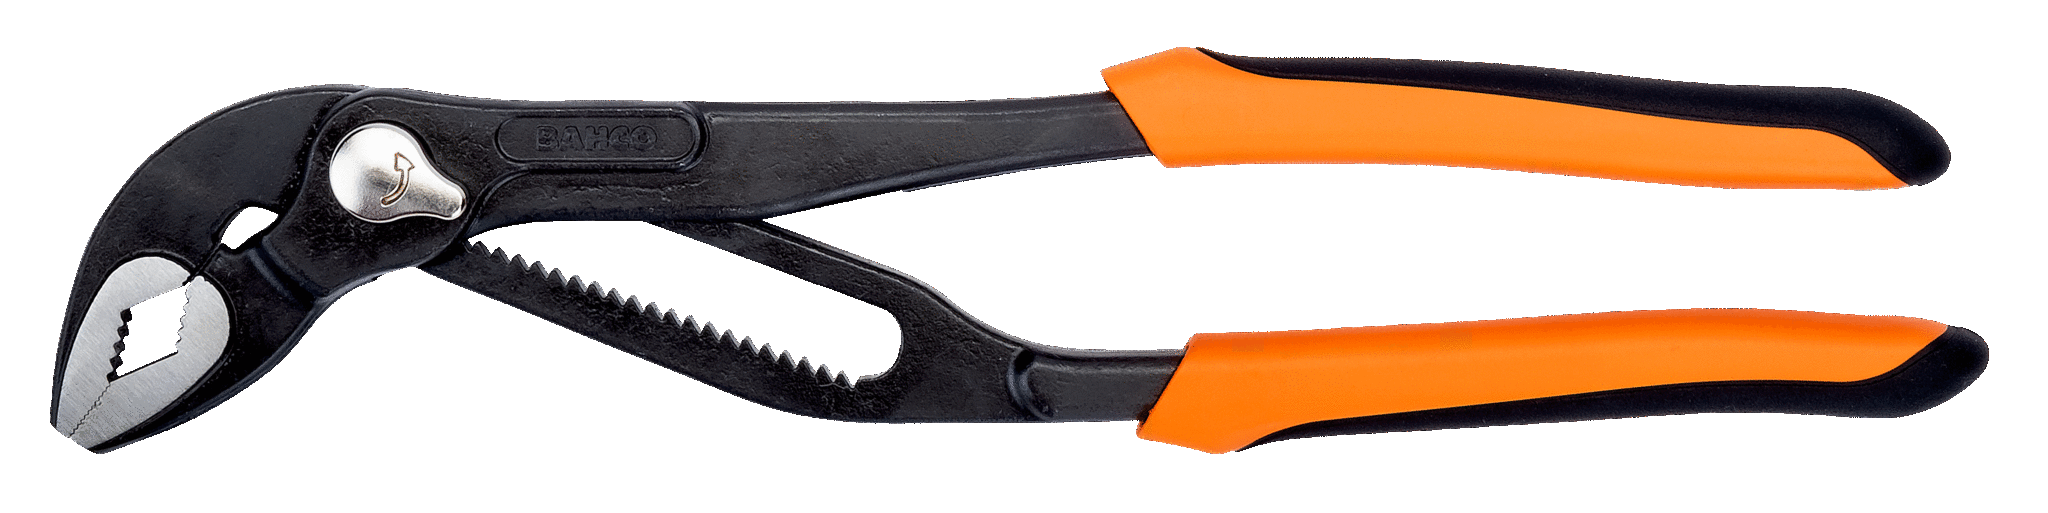 Quick Adjust Slip Joint Water Pump Pliers with Phosphate Finish - 7223 by Bahco